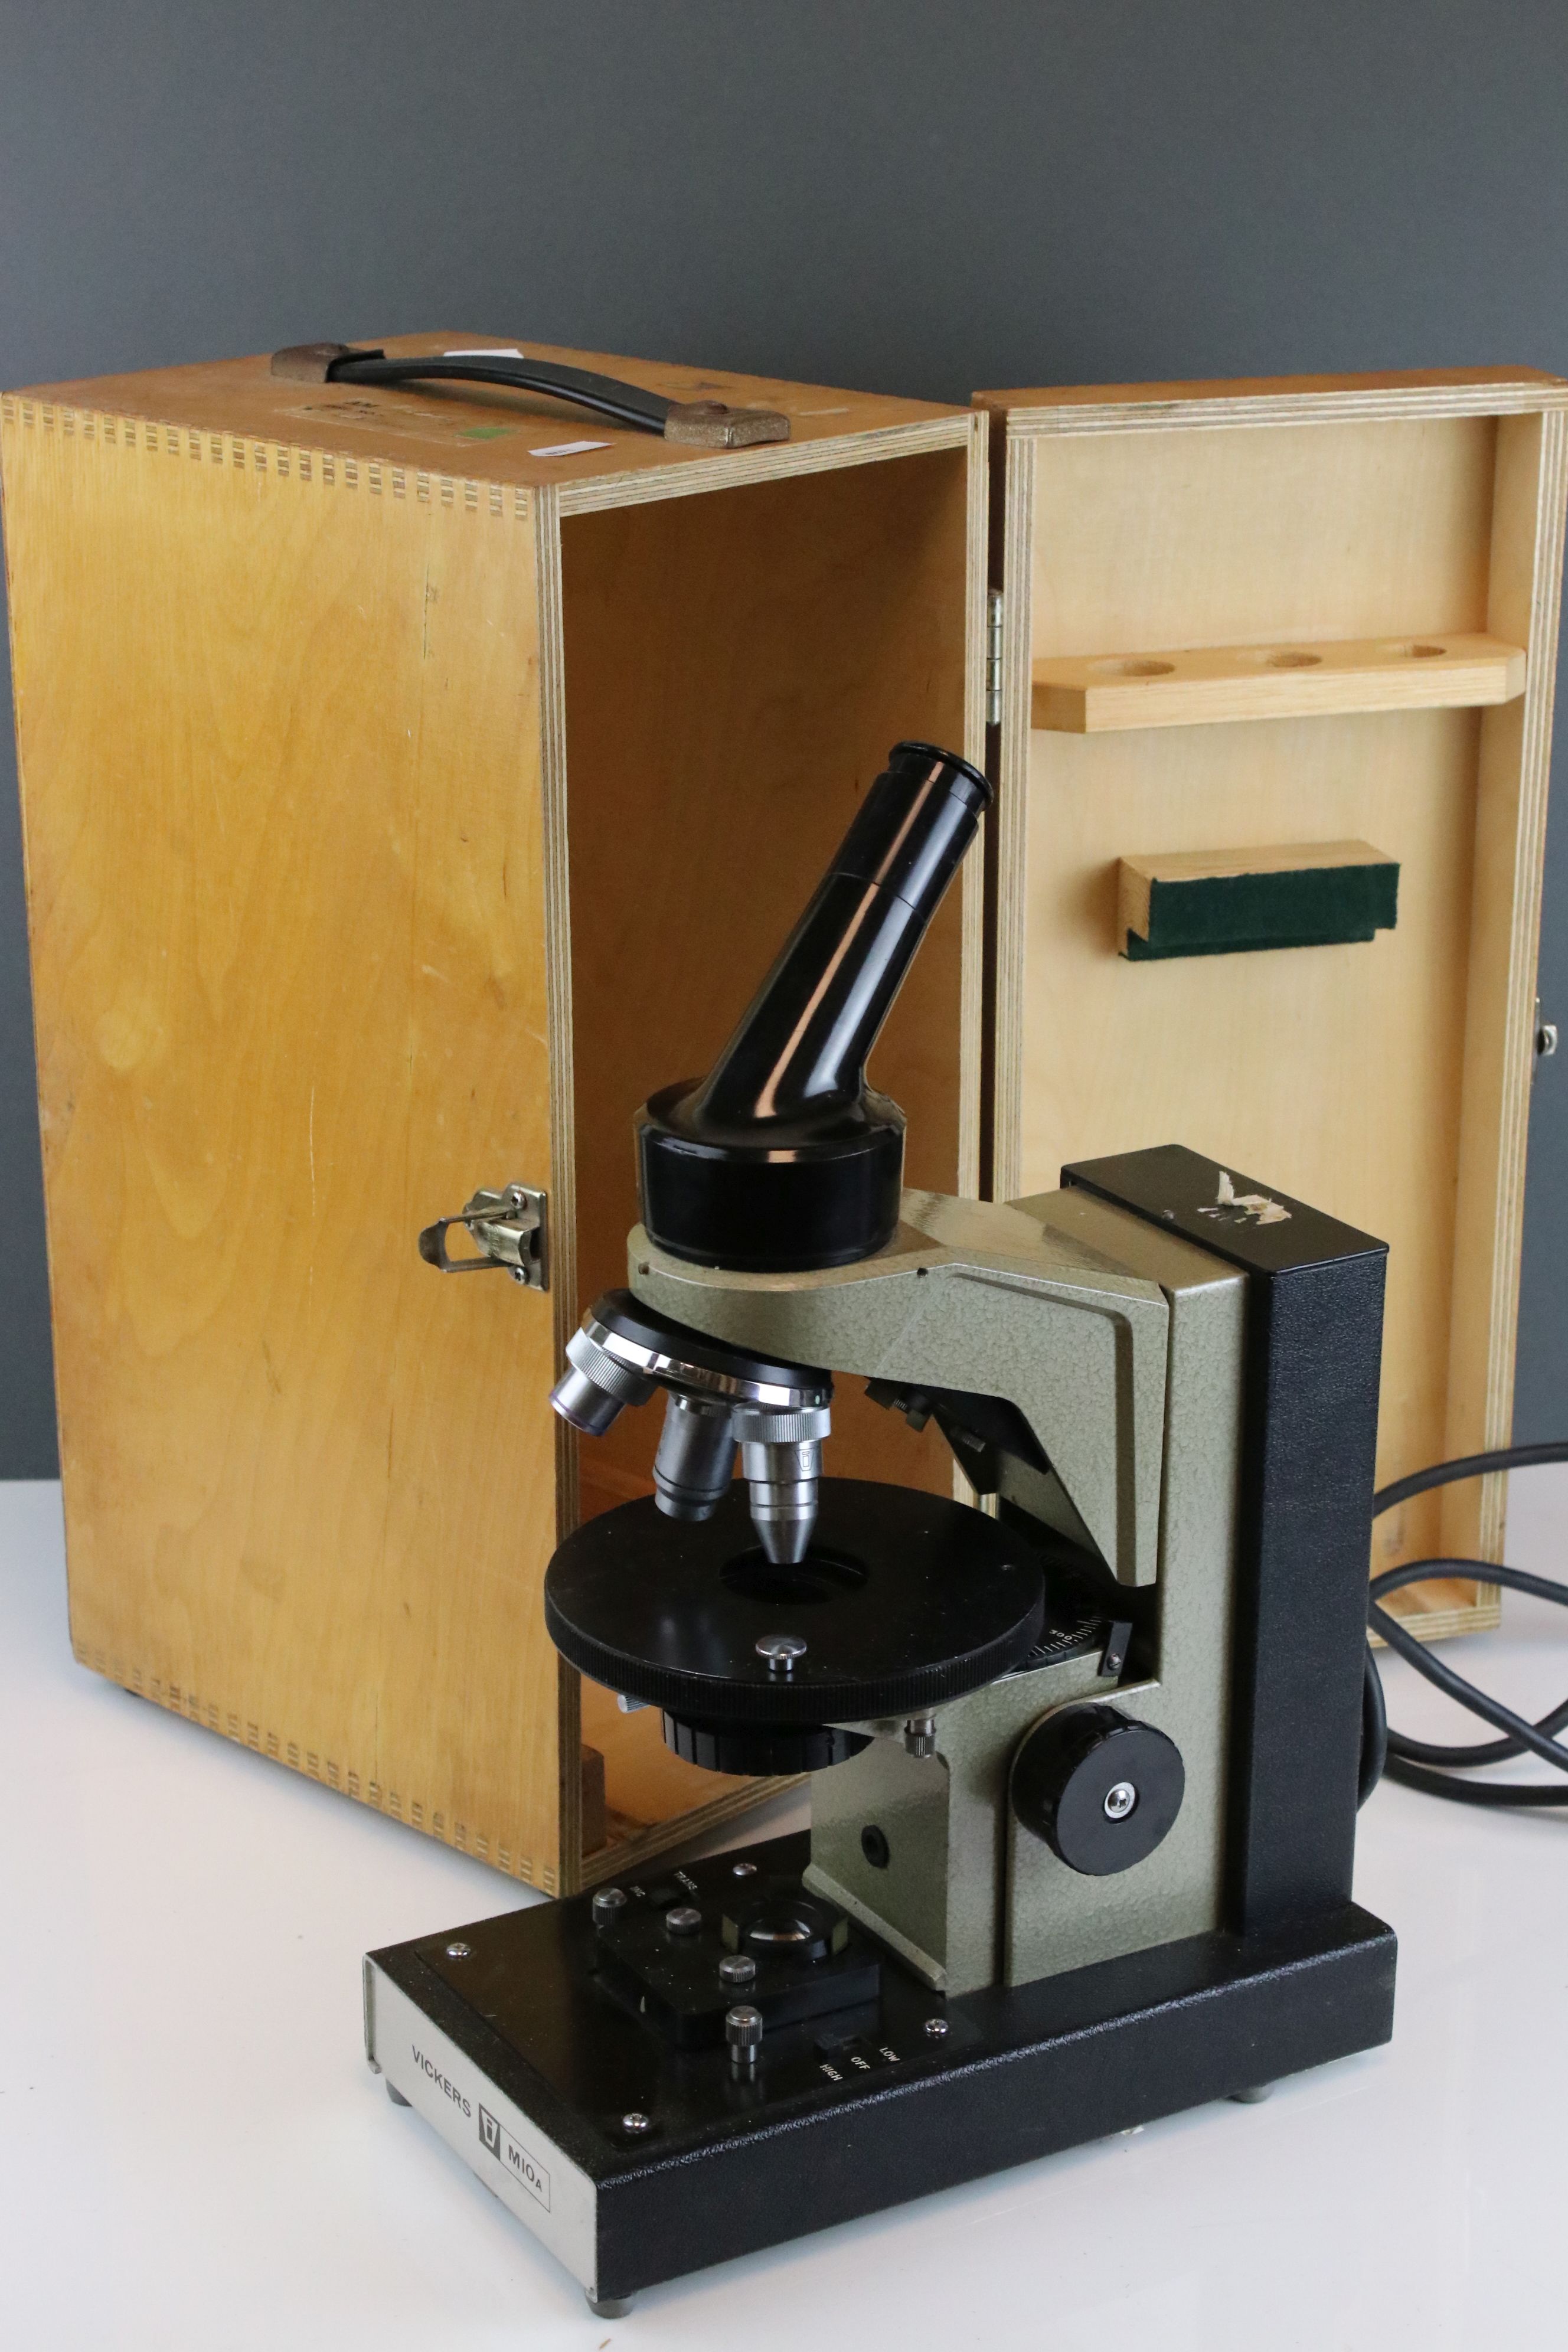 Mid 20th century Vickers electronic microscope complete with wooden storage case.